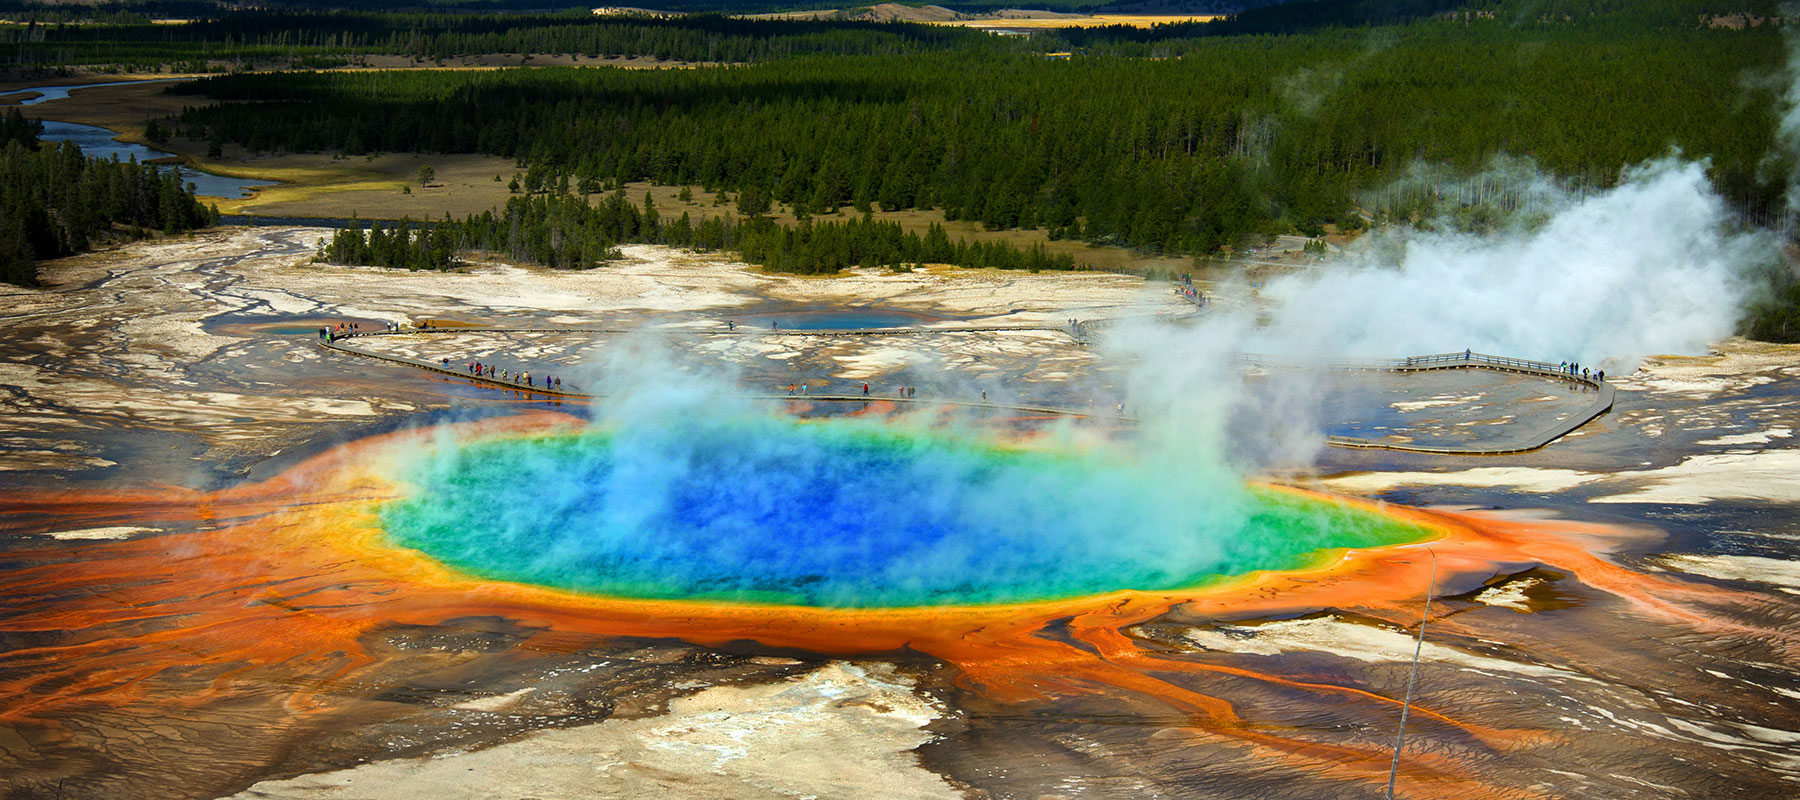 Grand Prismatic Spring on Yellowstone National Park Tour from Jackson Hole, WY - Buffalo Roam Tours